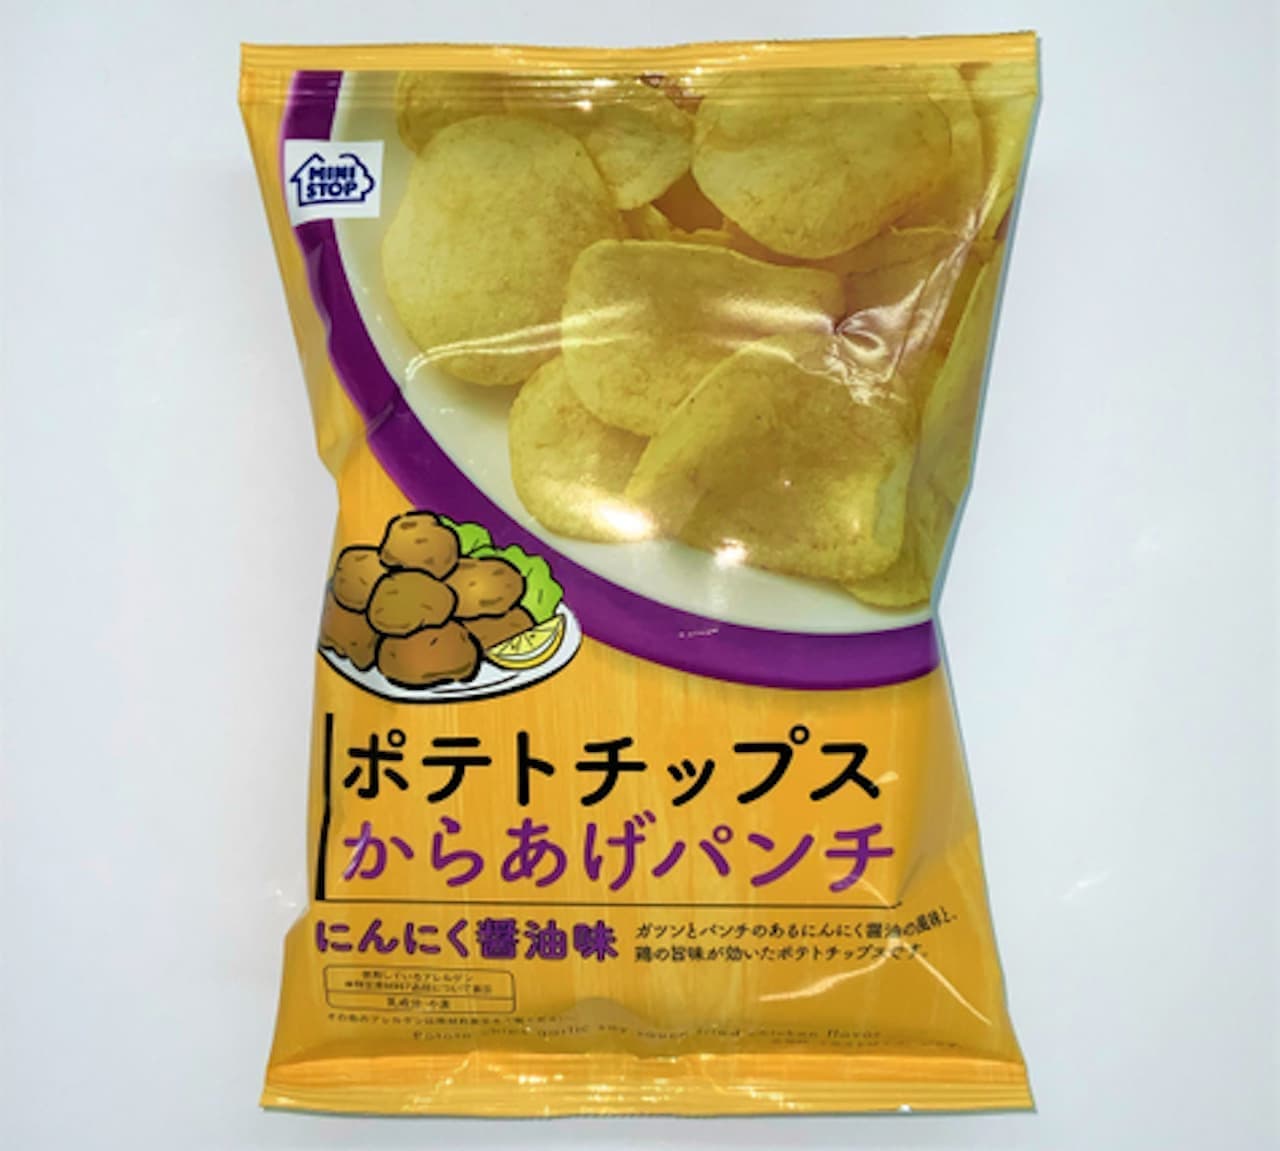 From "Potato Chips Karaage Punch Garlic Soy Sauce Flavor" Ministop